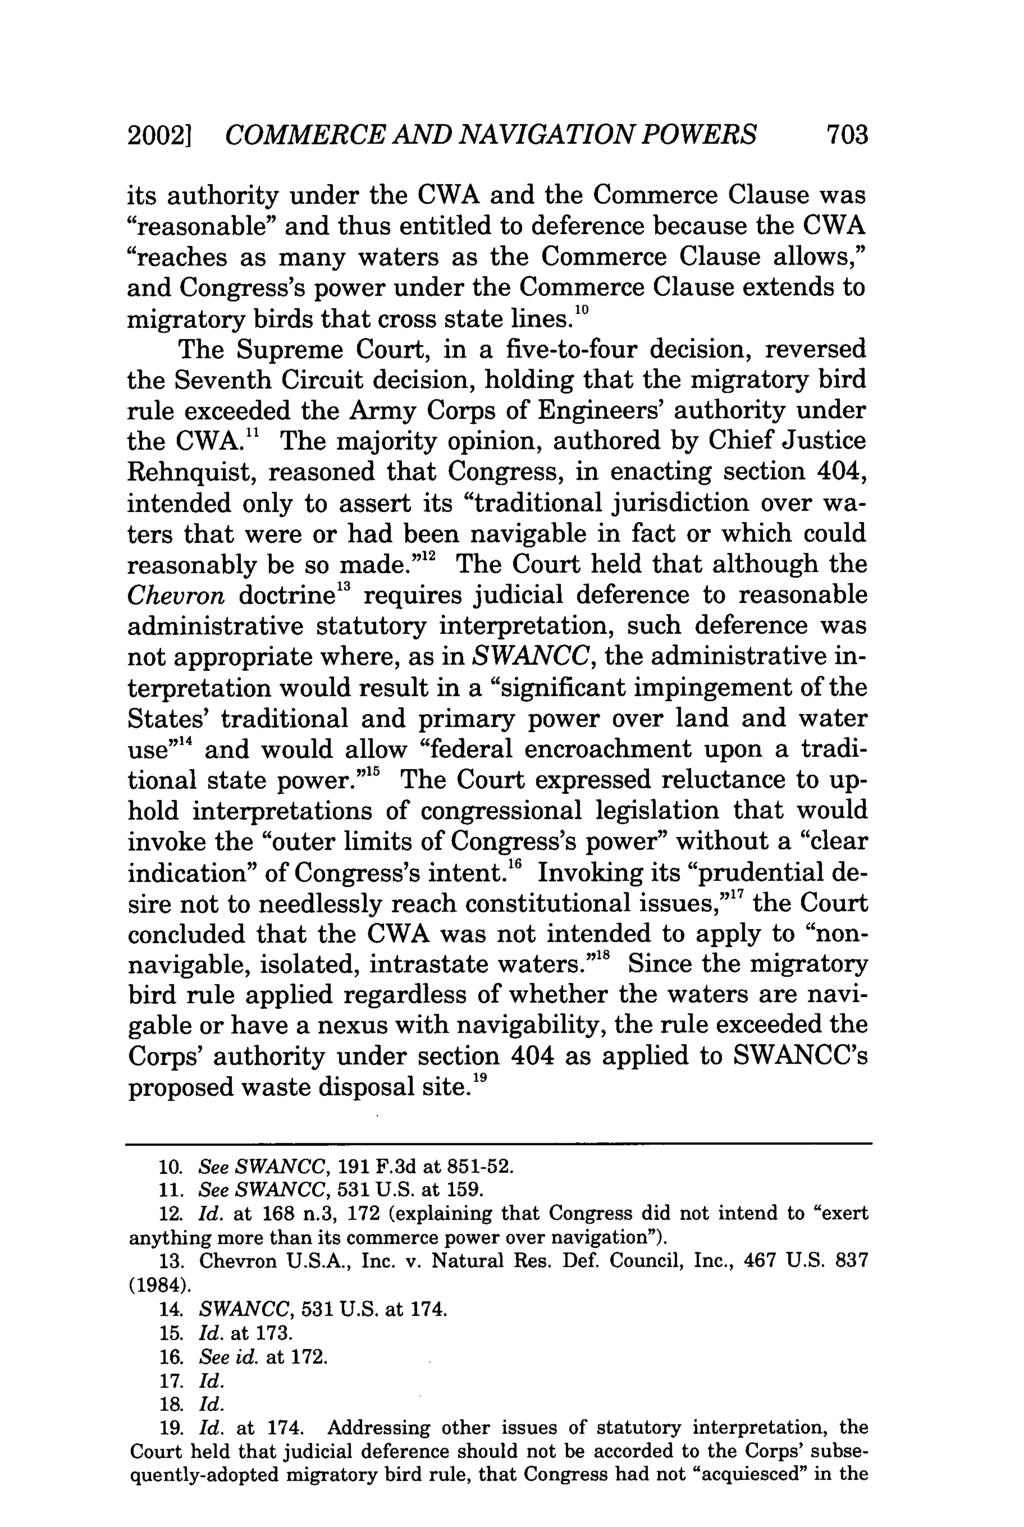 20021 COMMERCE AND NAVIGATION POWERS 703 its authority under the CWA and the Commerce Clause was "reasonable" and thus entitled to deference because the CWA "reaches as many waters as the Commerce